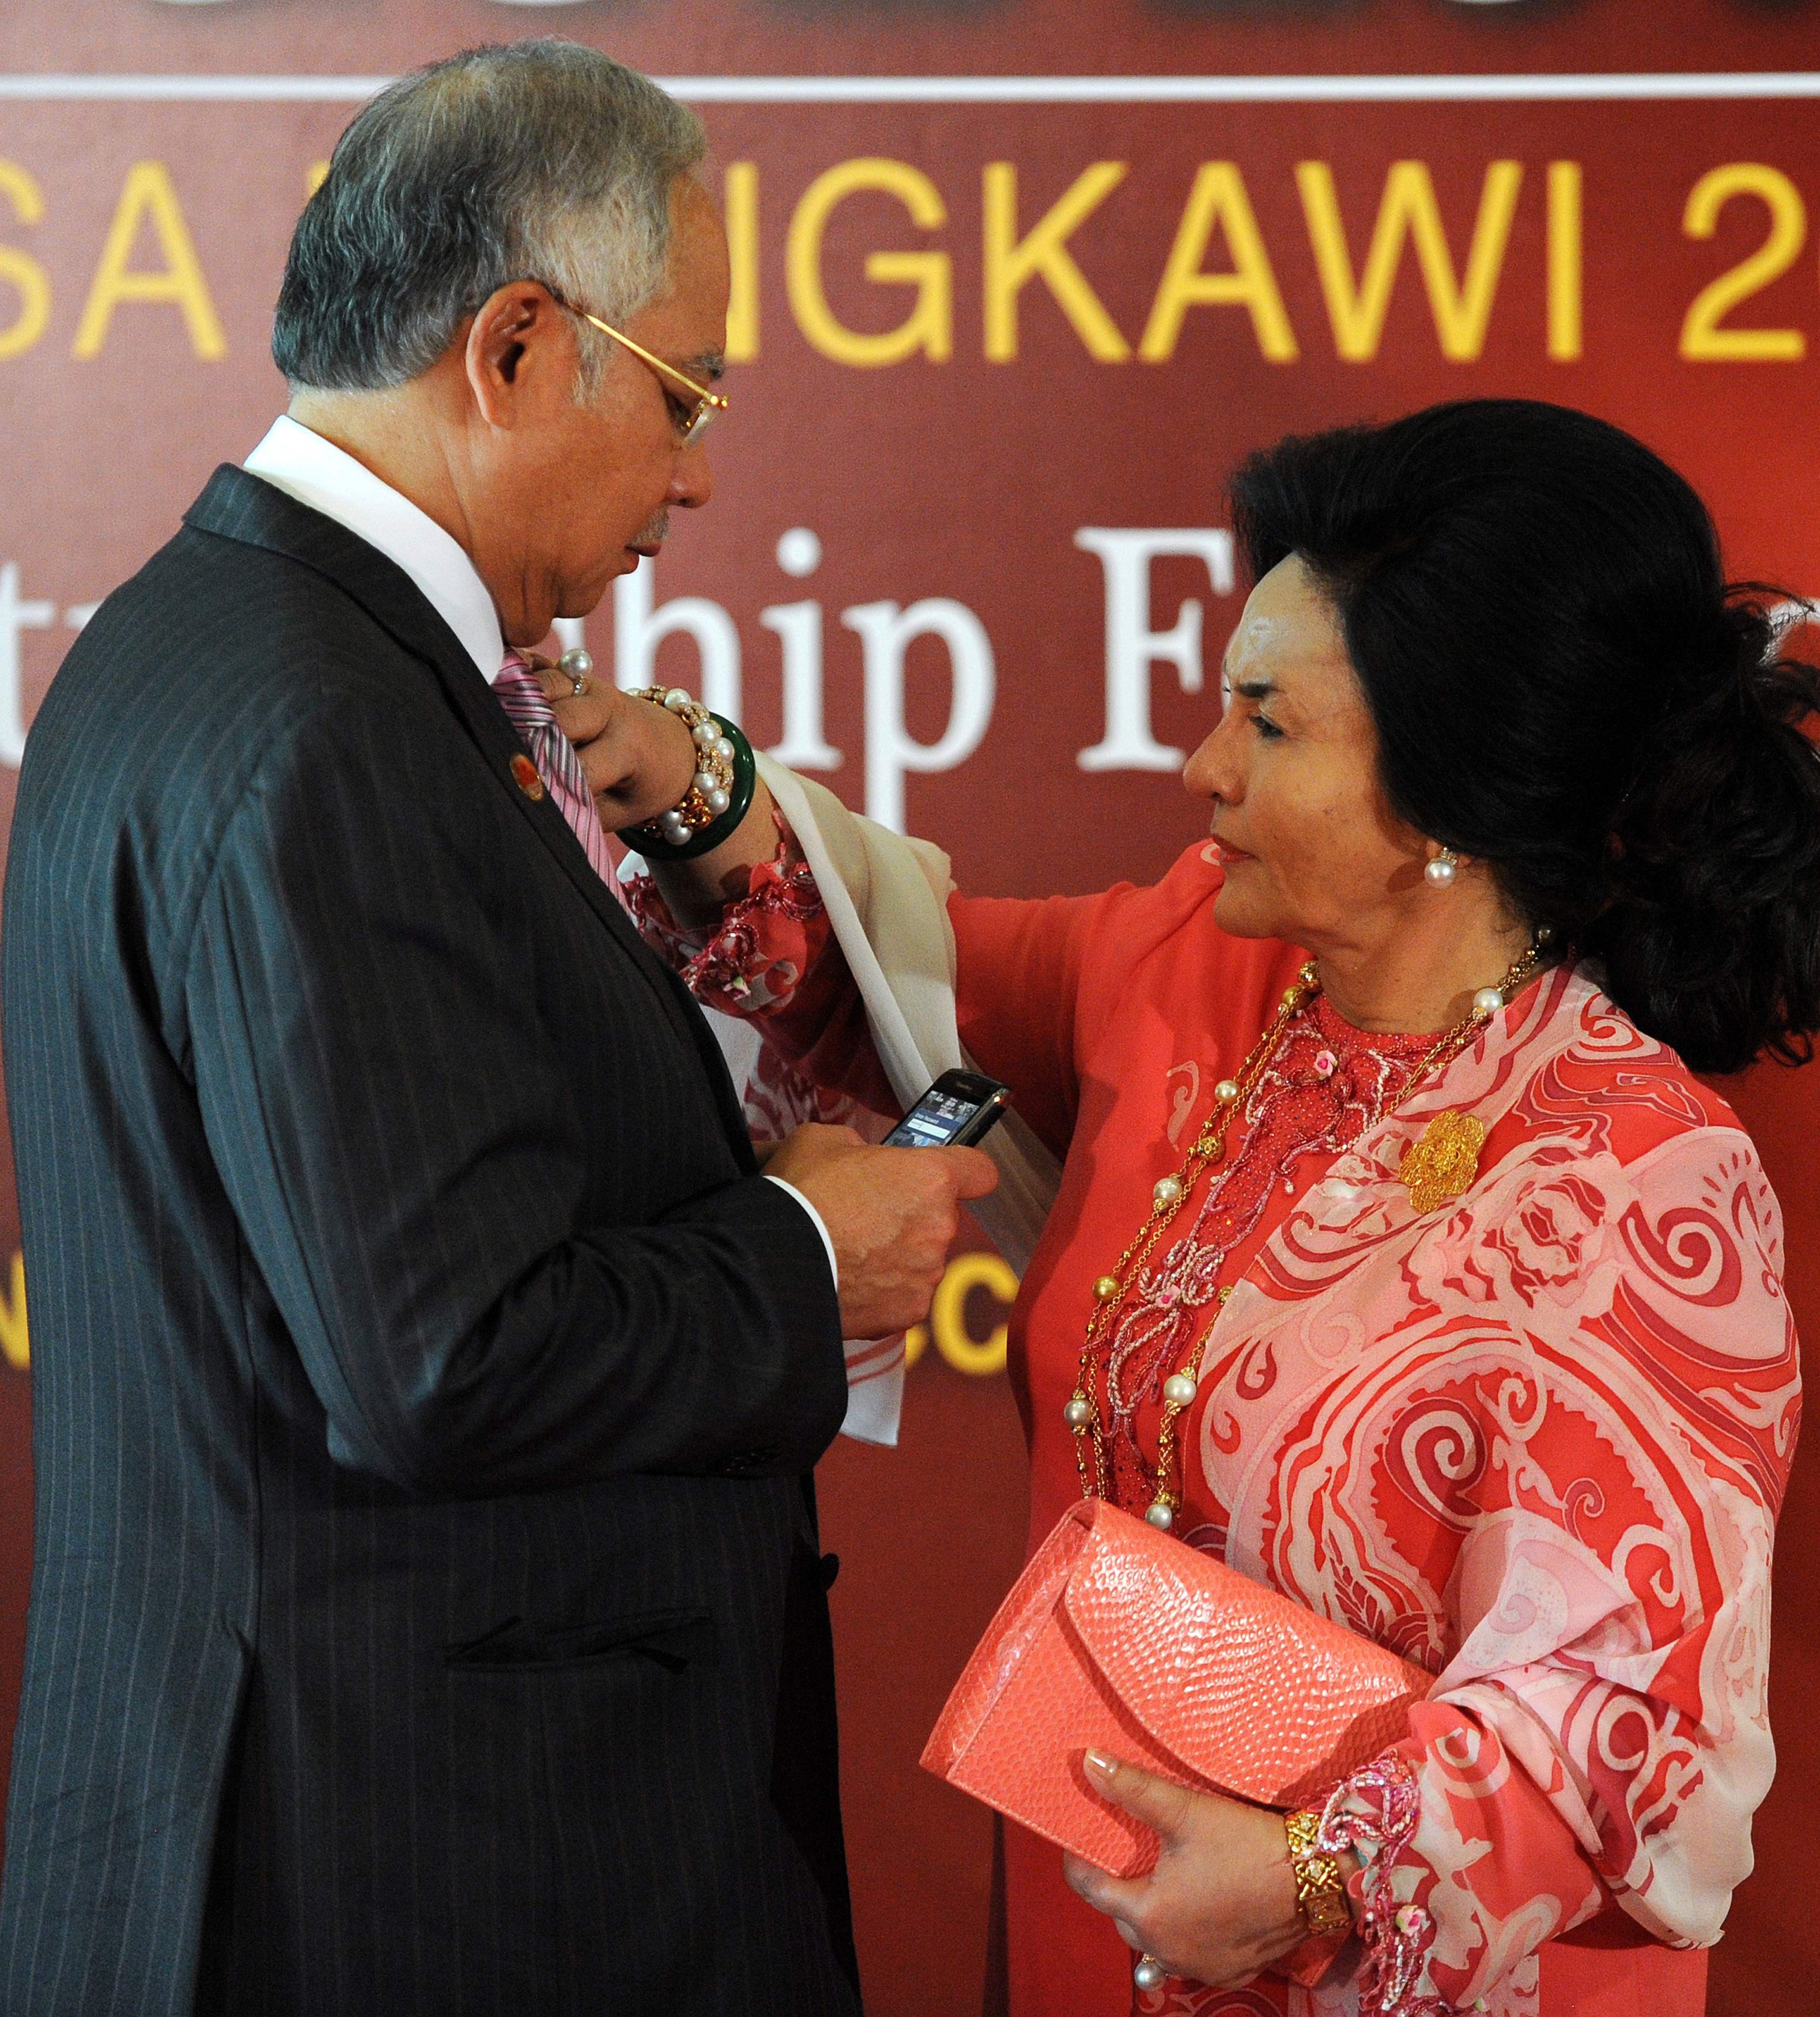 Following the downfall of Rosmah Mansor, Malaysia’s former first lady, we look at spouses who are known for their love of luxury and designer goods and weren’t shy about raiding their nation’s coffers to fund their shopping sprees